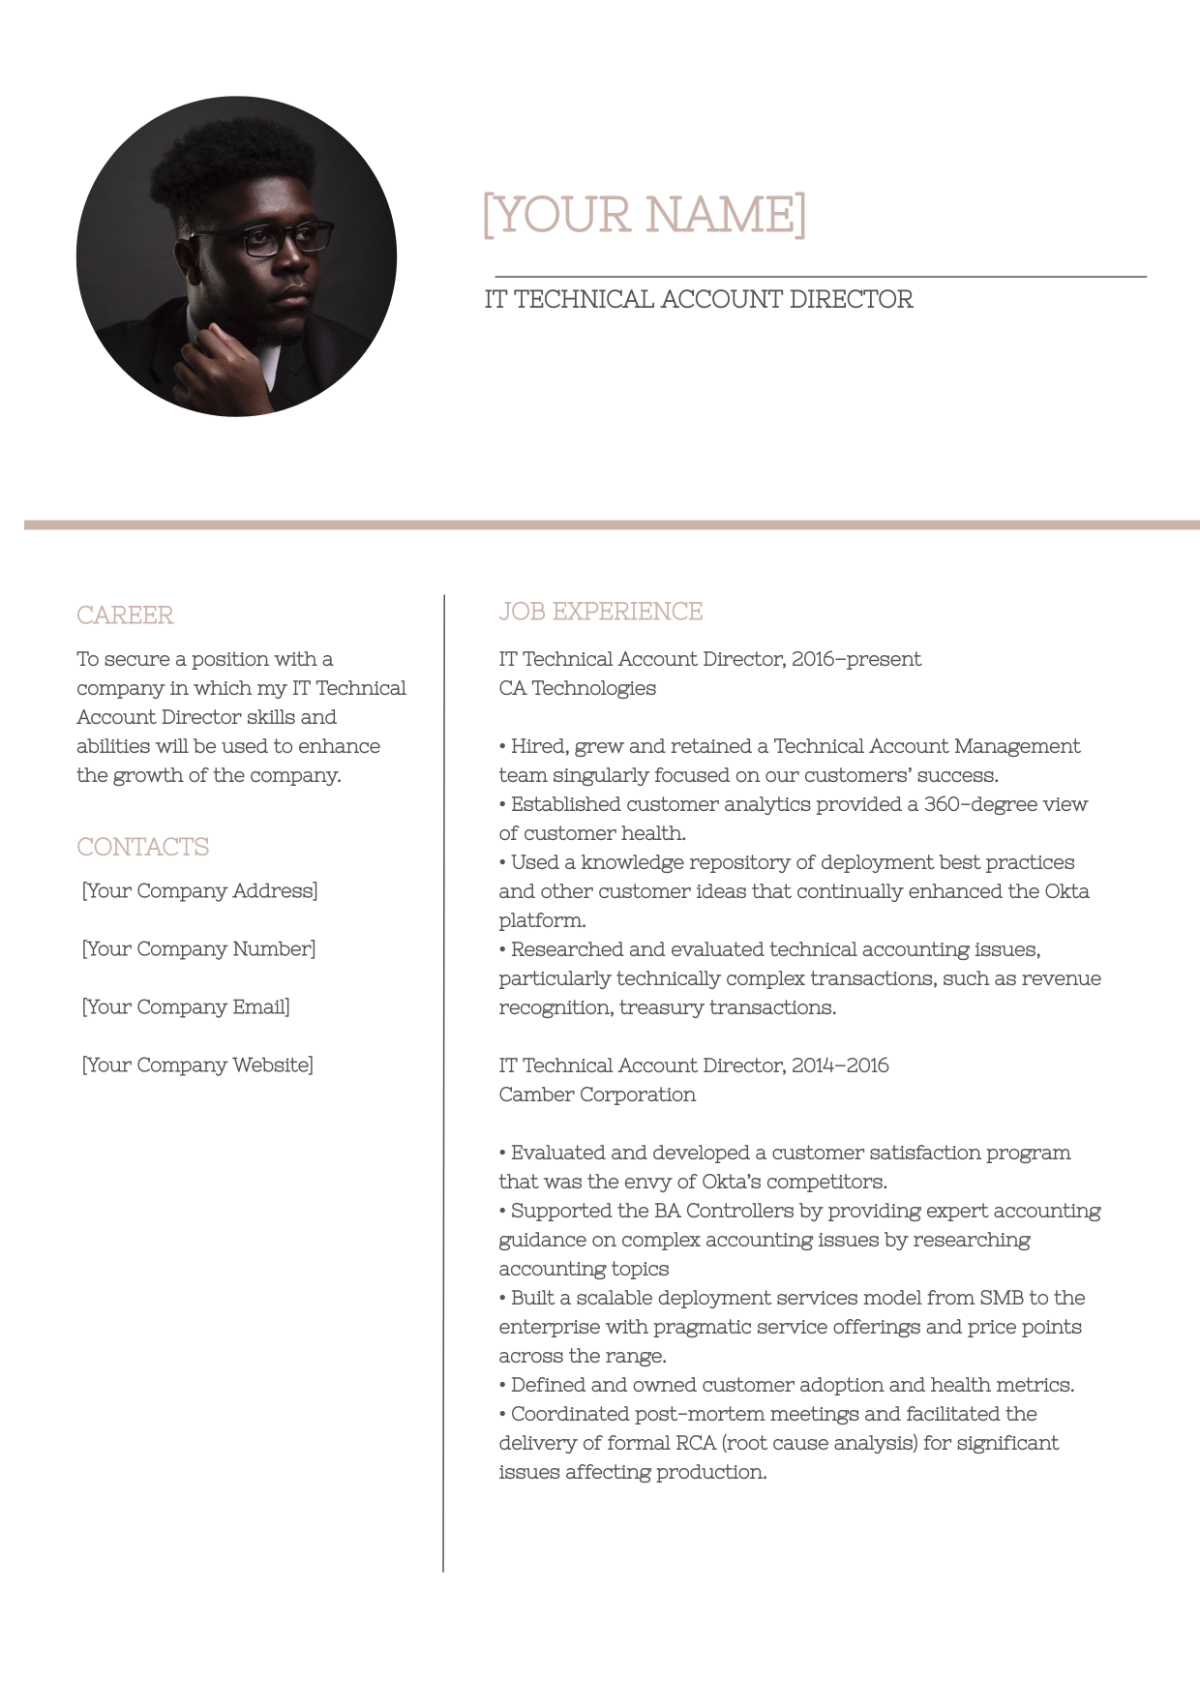 IT Technical Account Director Resume